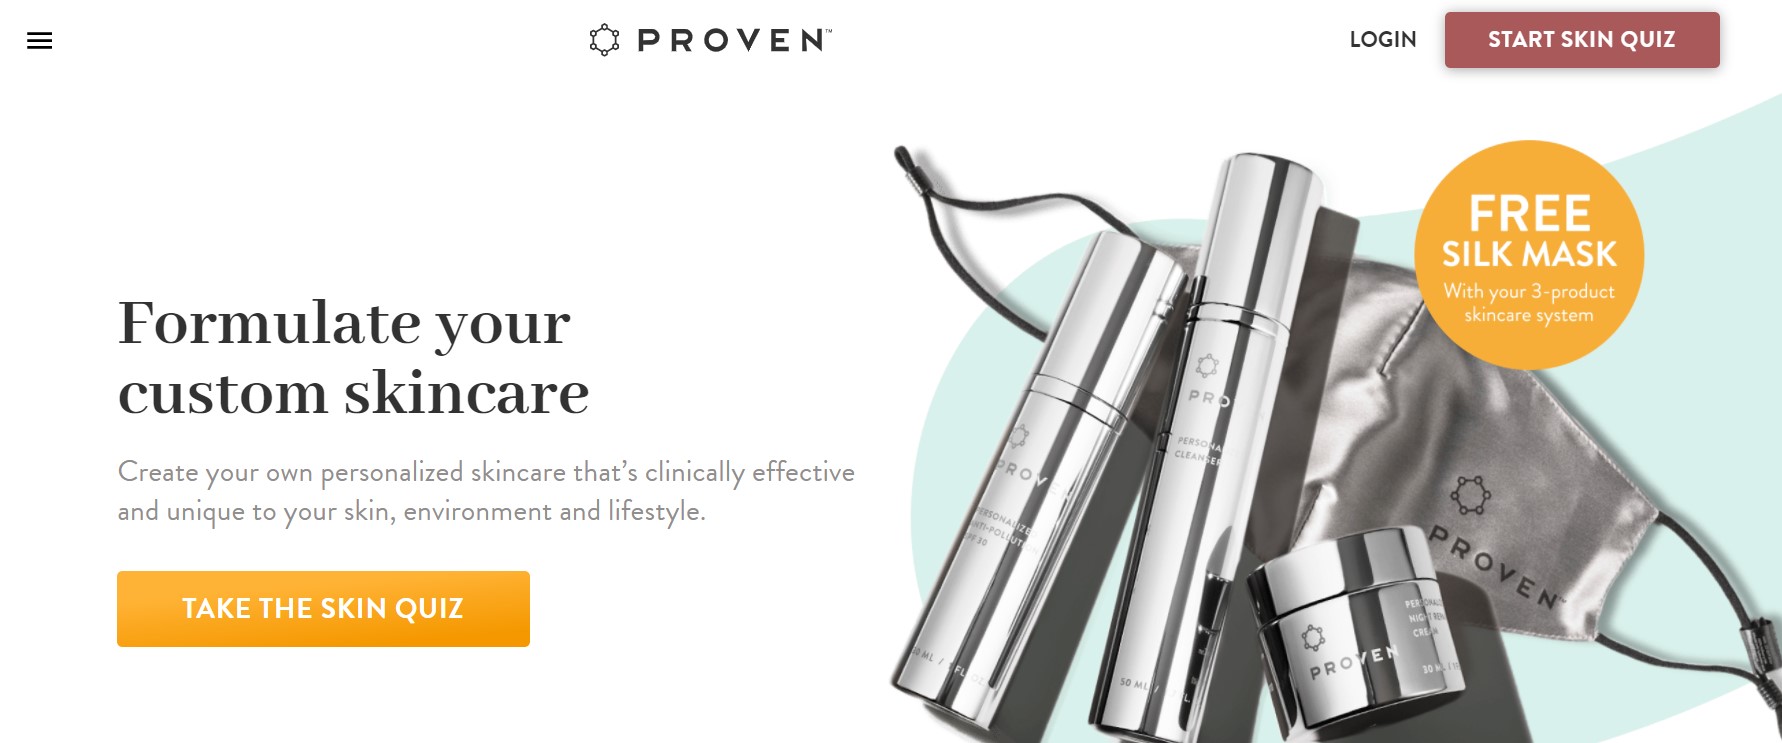 Find detailed information about  PROVEN Skincare